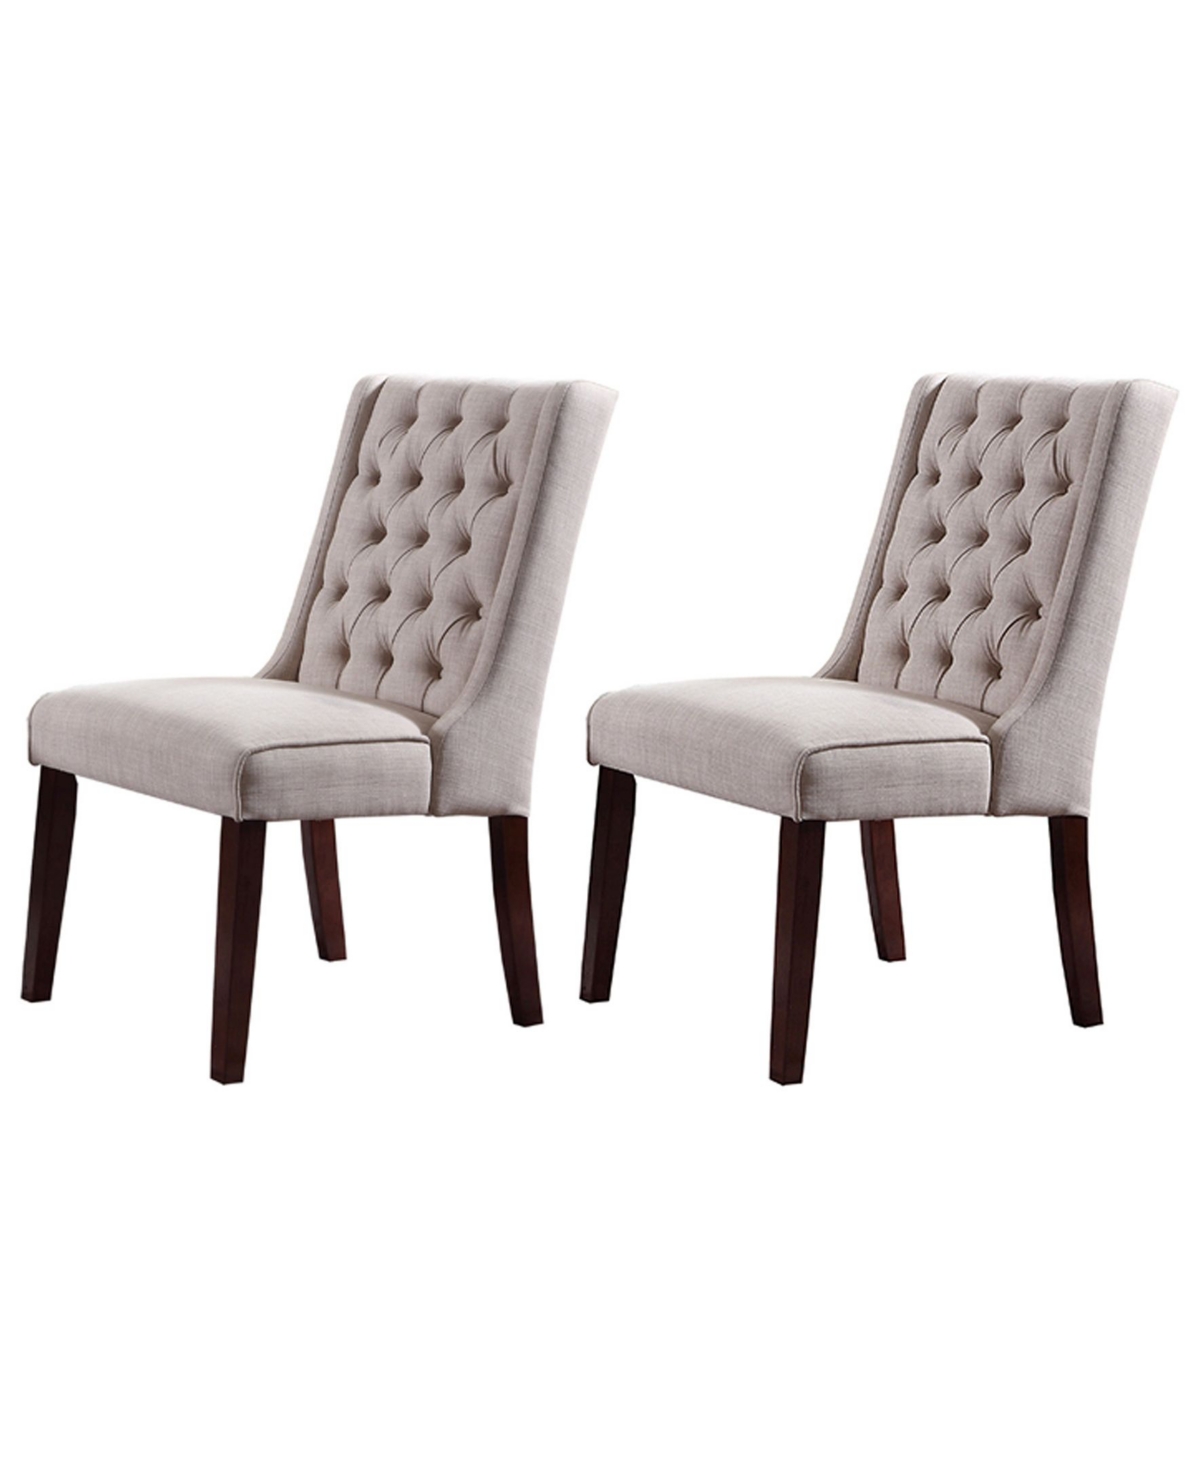 Newport Upholstered Side Chairs with Tufted Back, Set of 2